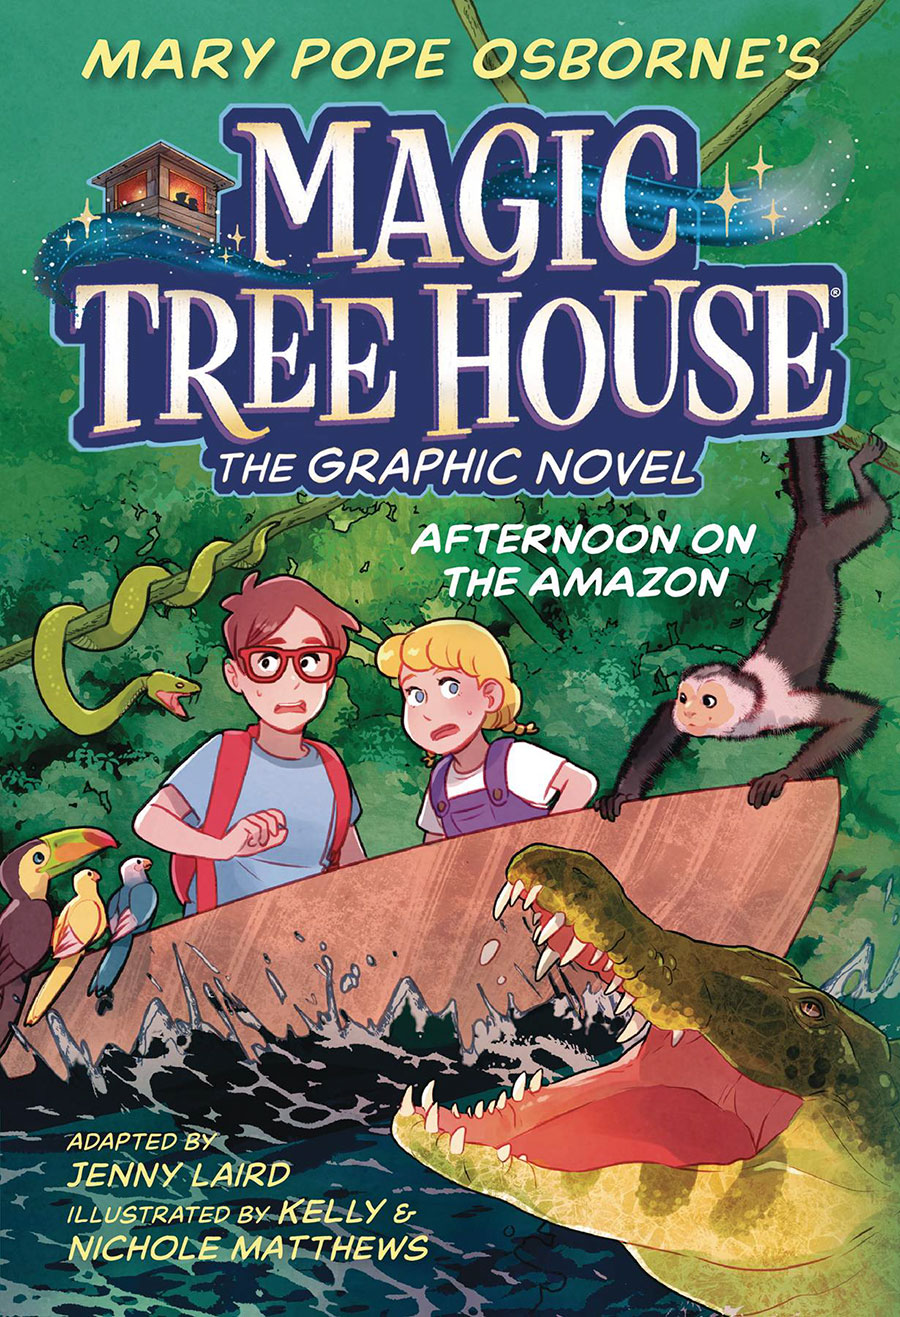 Magic Tree House The Graphic Novel Vol 6 Afternoon On The Amazon TP